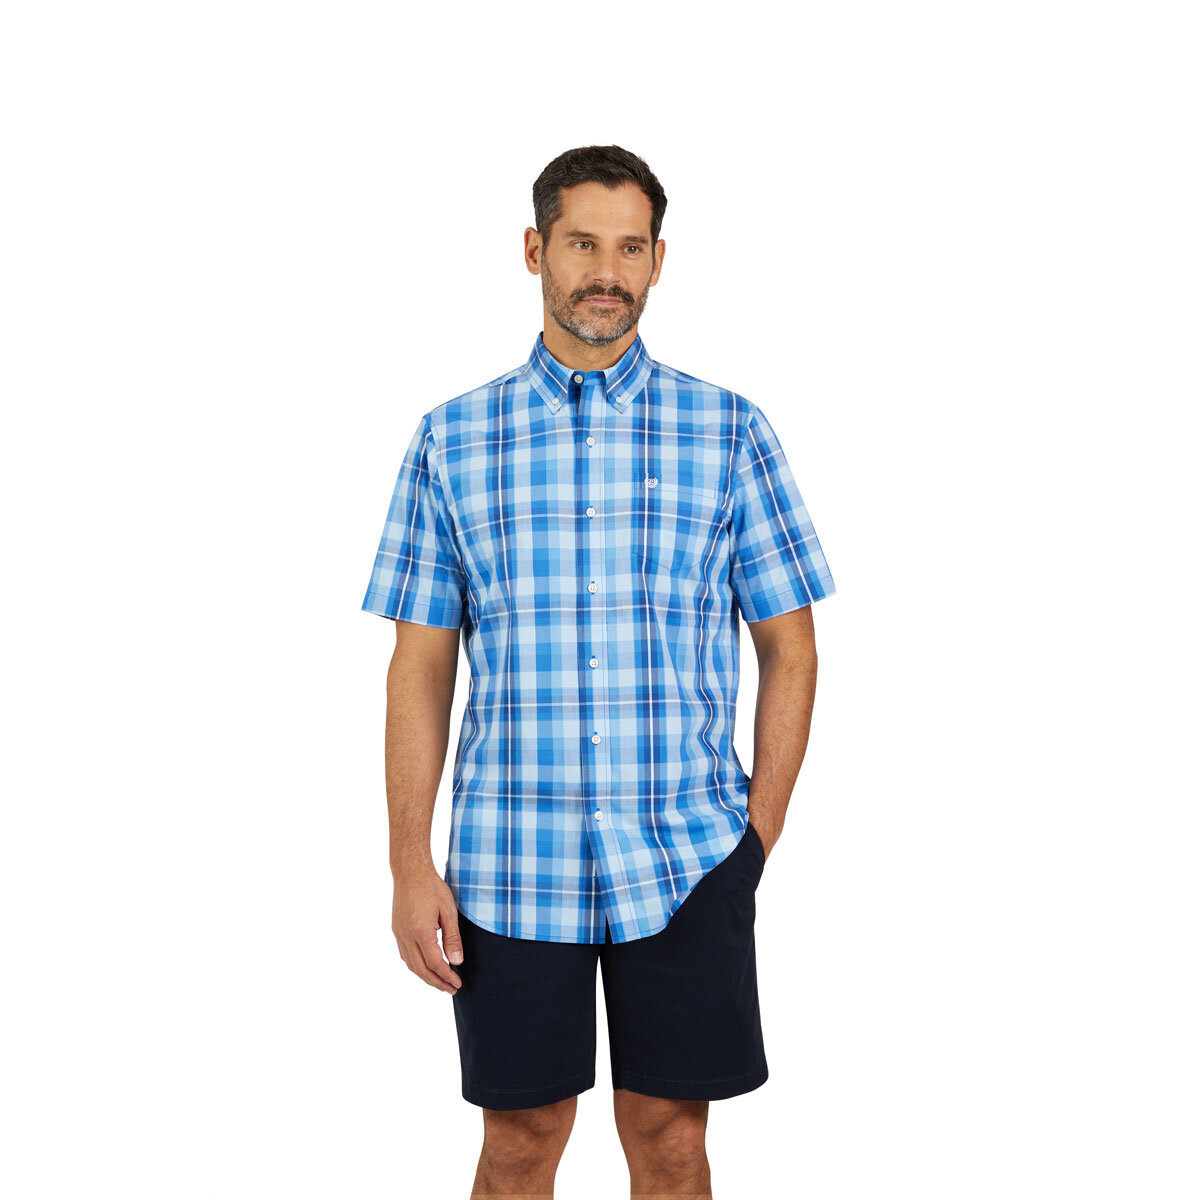 Chaps Men’s Easy Care Short Sleeve Woven Shirt in Marina Blue